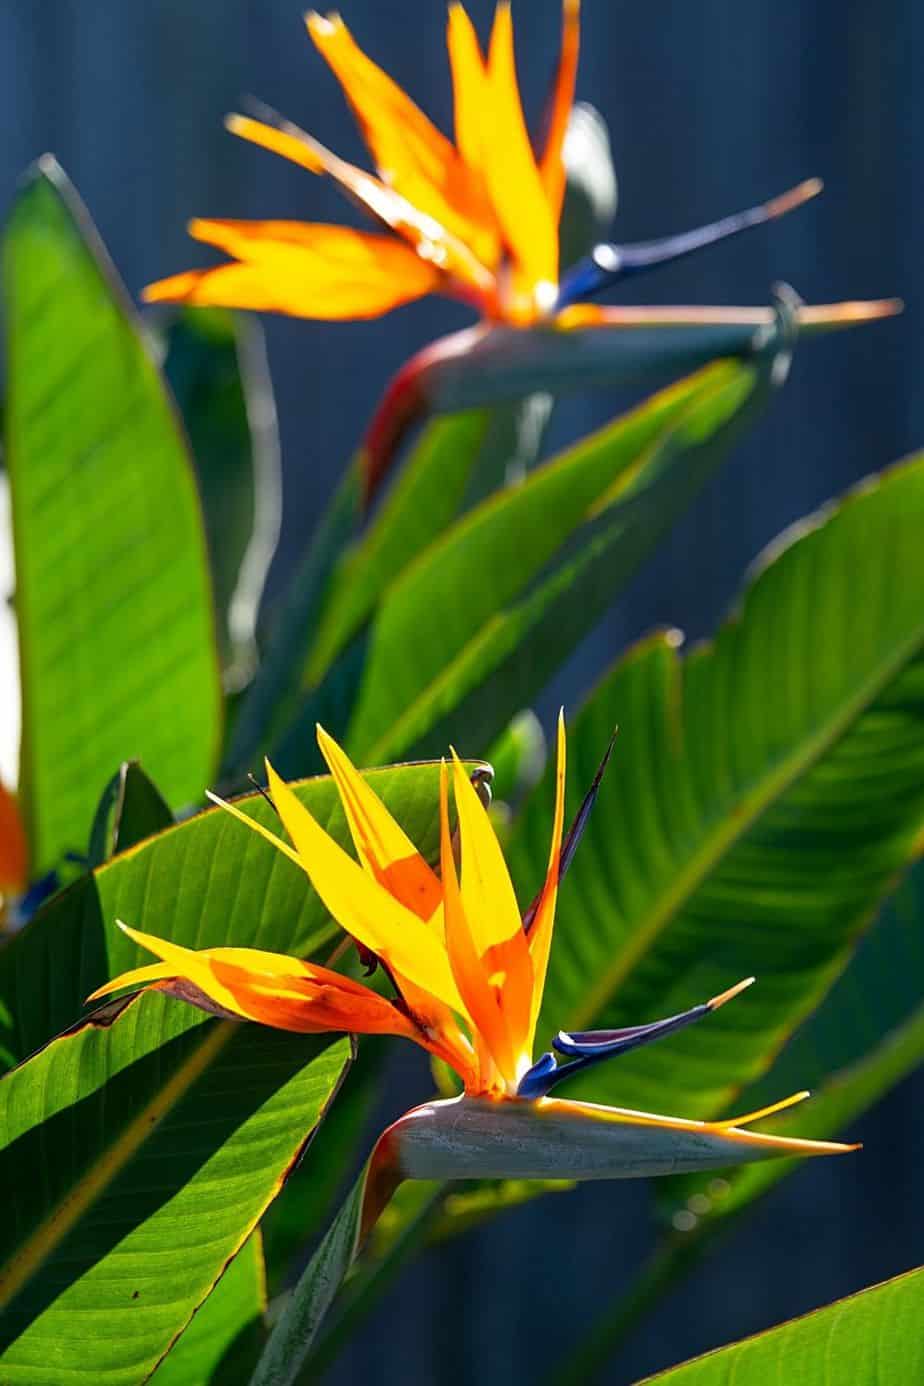 A good ornamental plant to place by your northwest-facing window is the Birds of Paradise plant